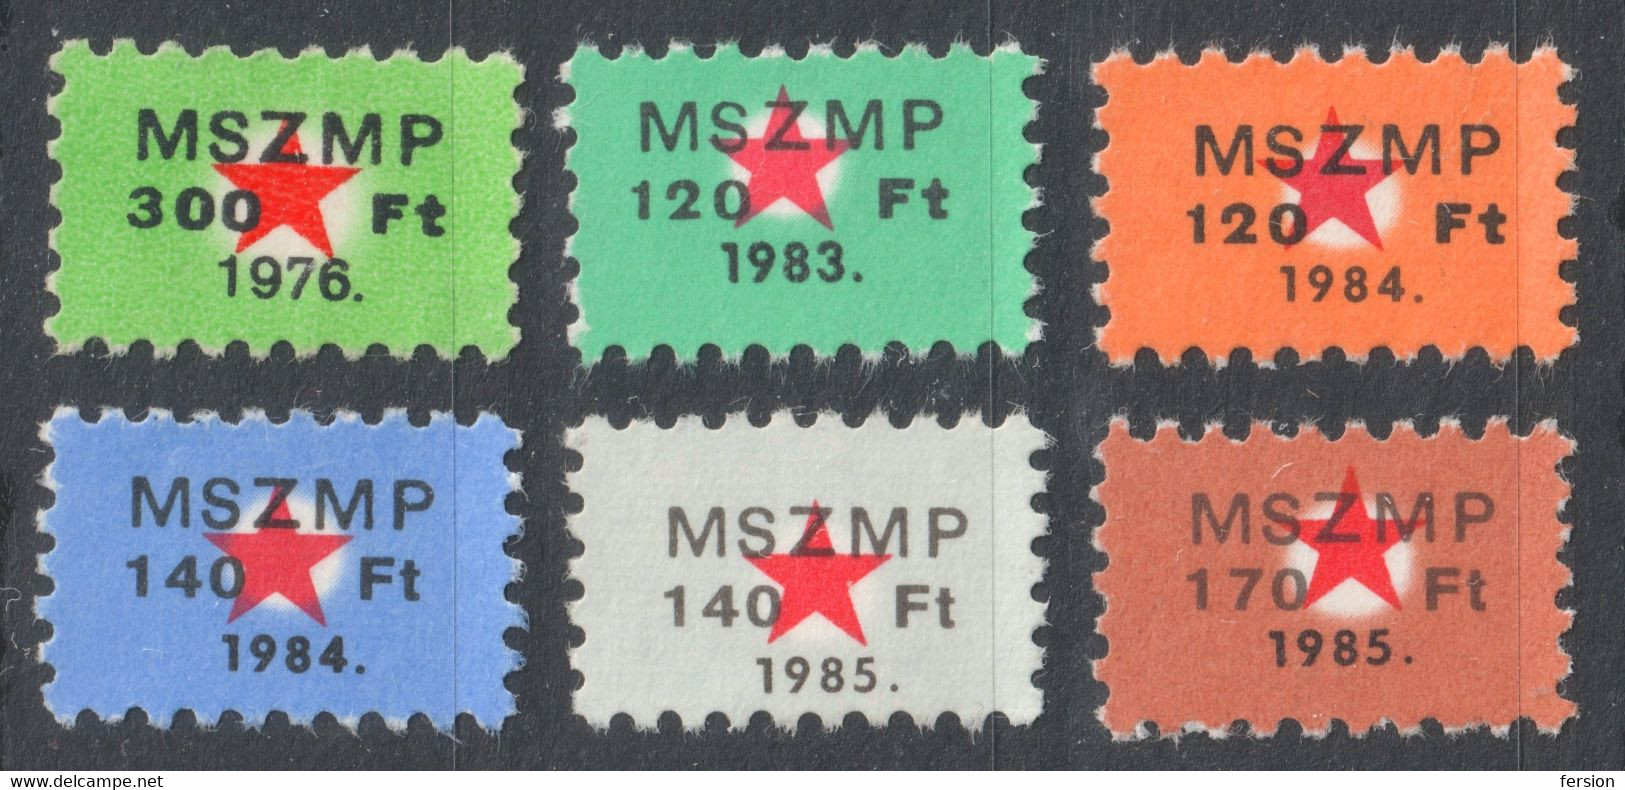 Communist Communism RED STAR Membership Stamp Hungarian Socialist Workers Party MSZMP Red Star HUNGARY Used LOT - Service